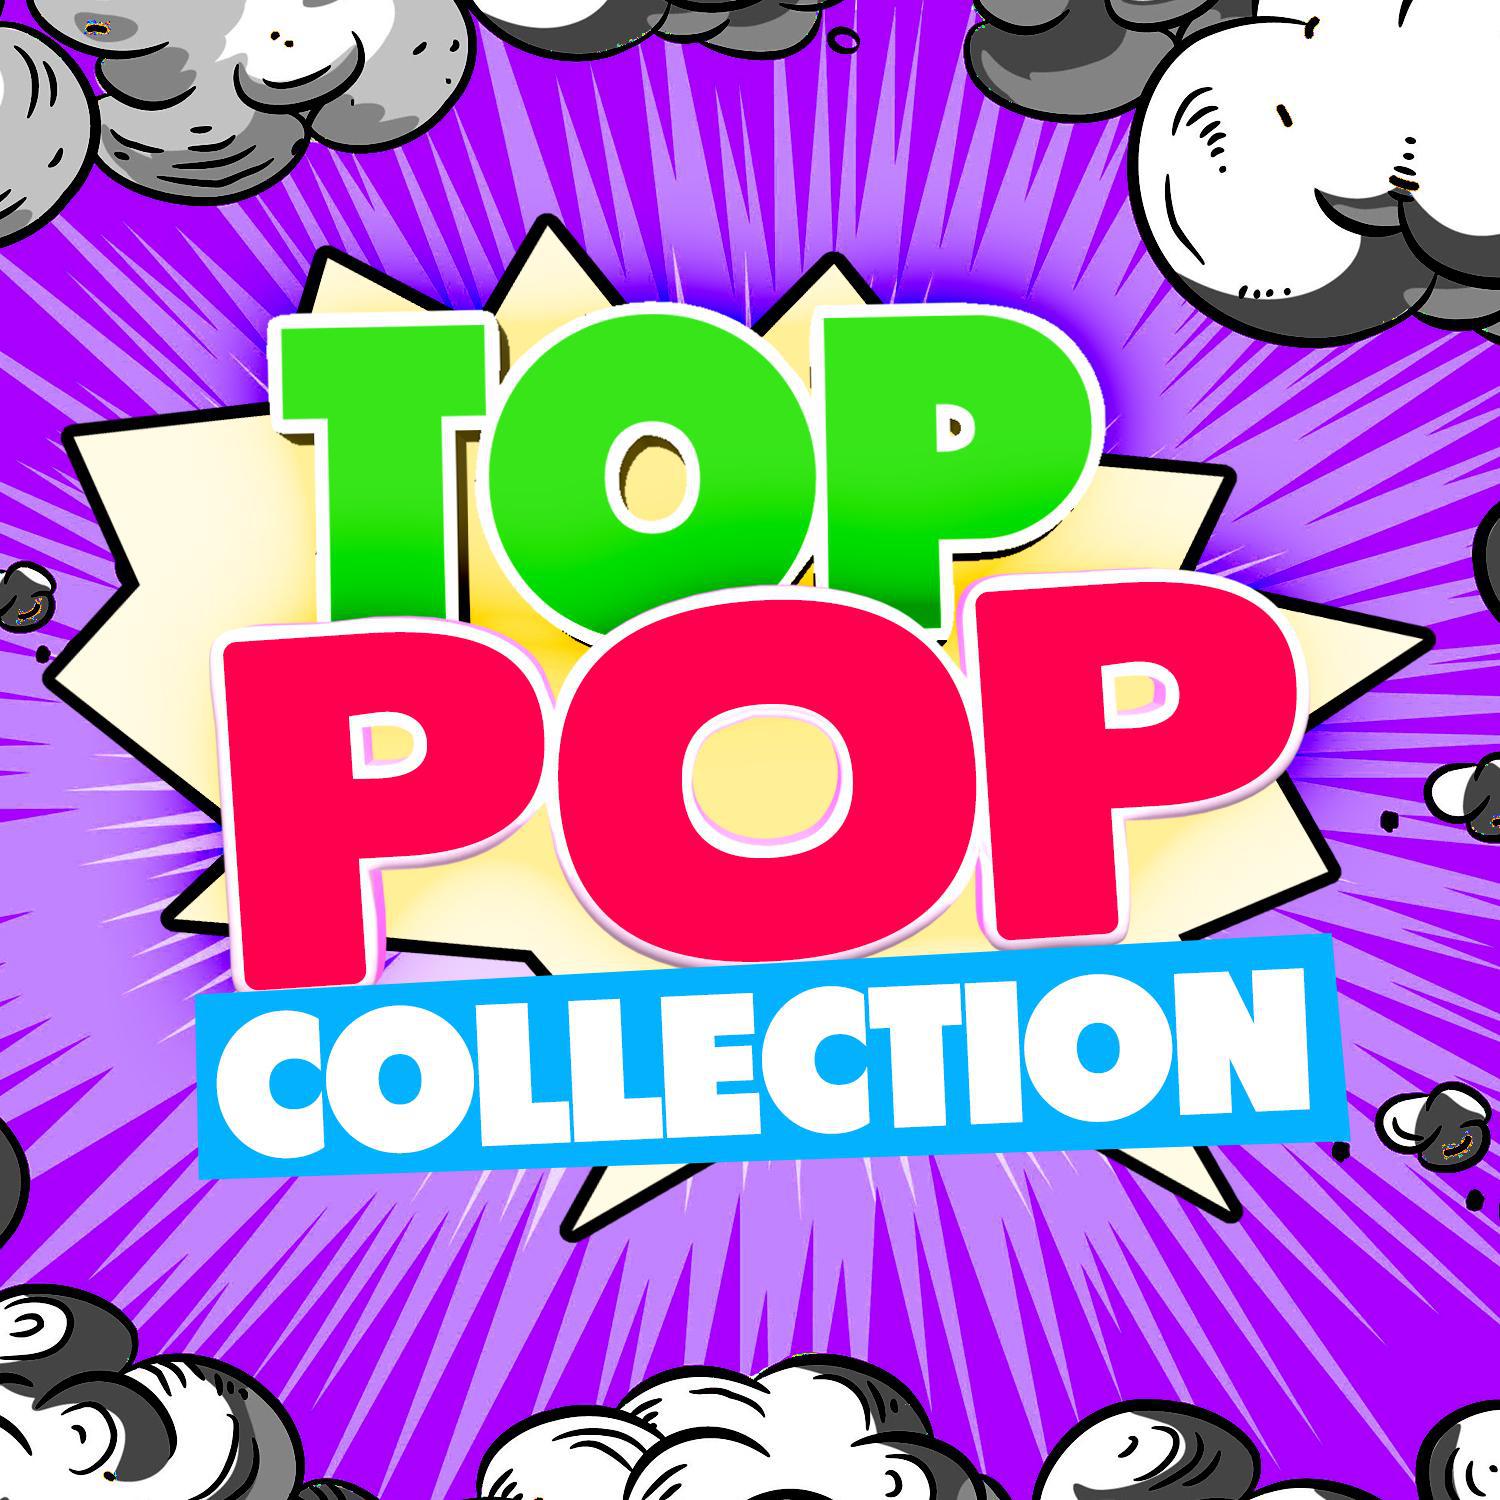 Top Pop Collection